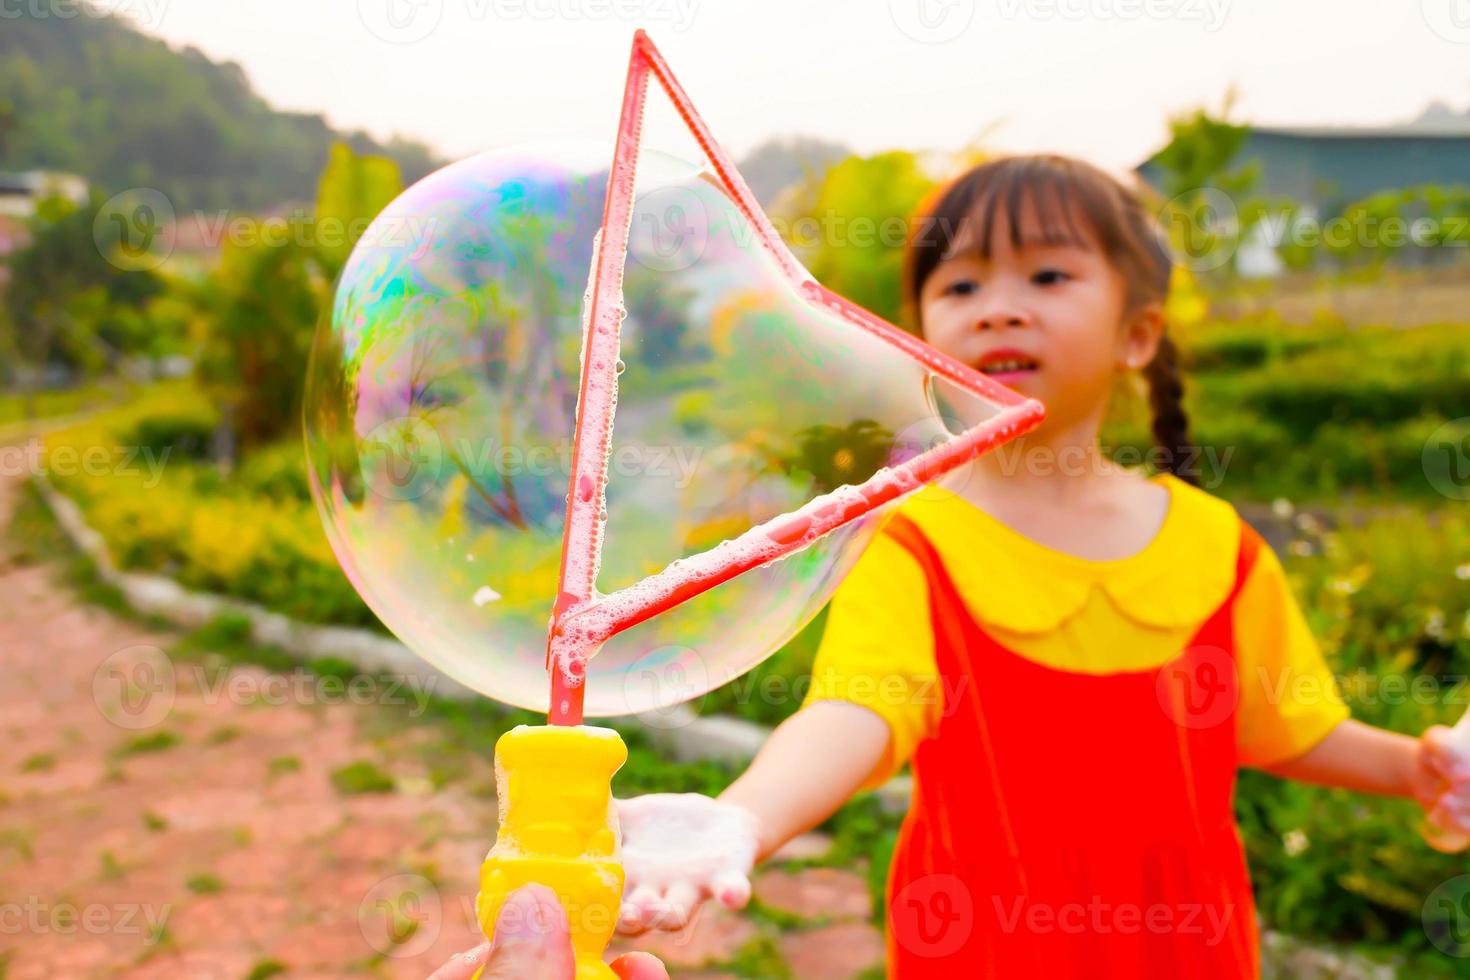 Lovely Baby girl wears yellow-orange outfit, gokowa outfit or Mugunghwa playing bubble in a public park. Girls and teen fashion dress. photo